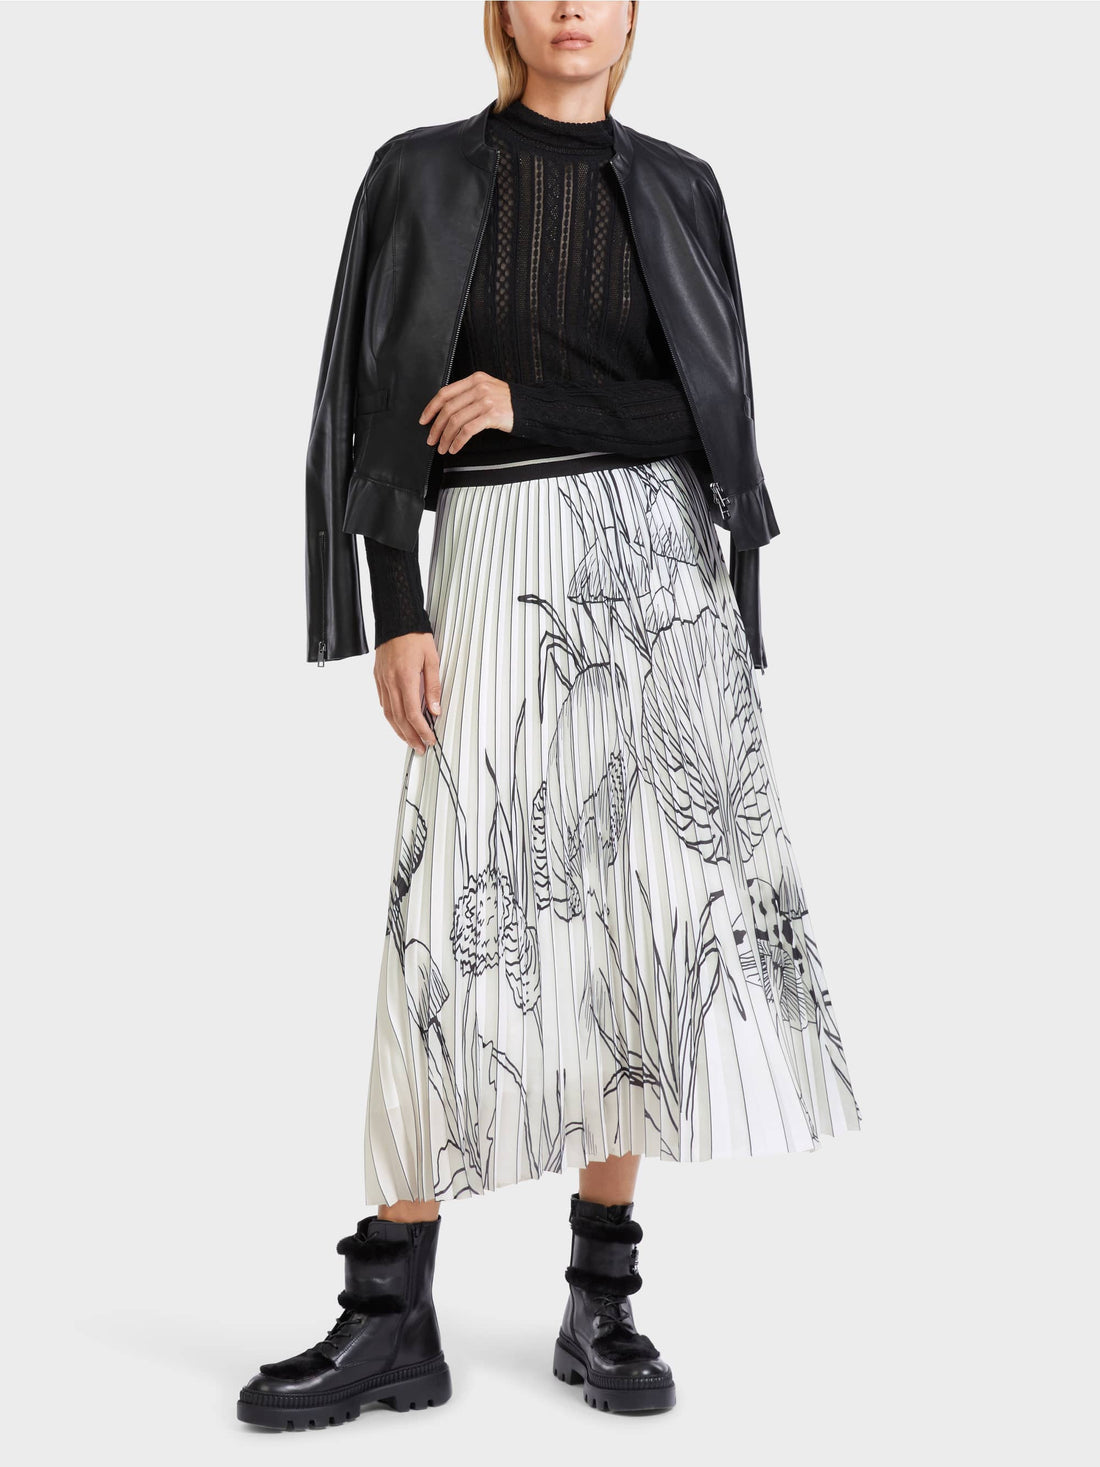 Pleated Rethink Together Print Skirt_VC 71.20 W76_110_01